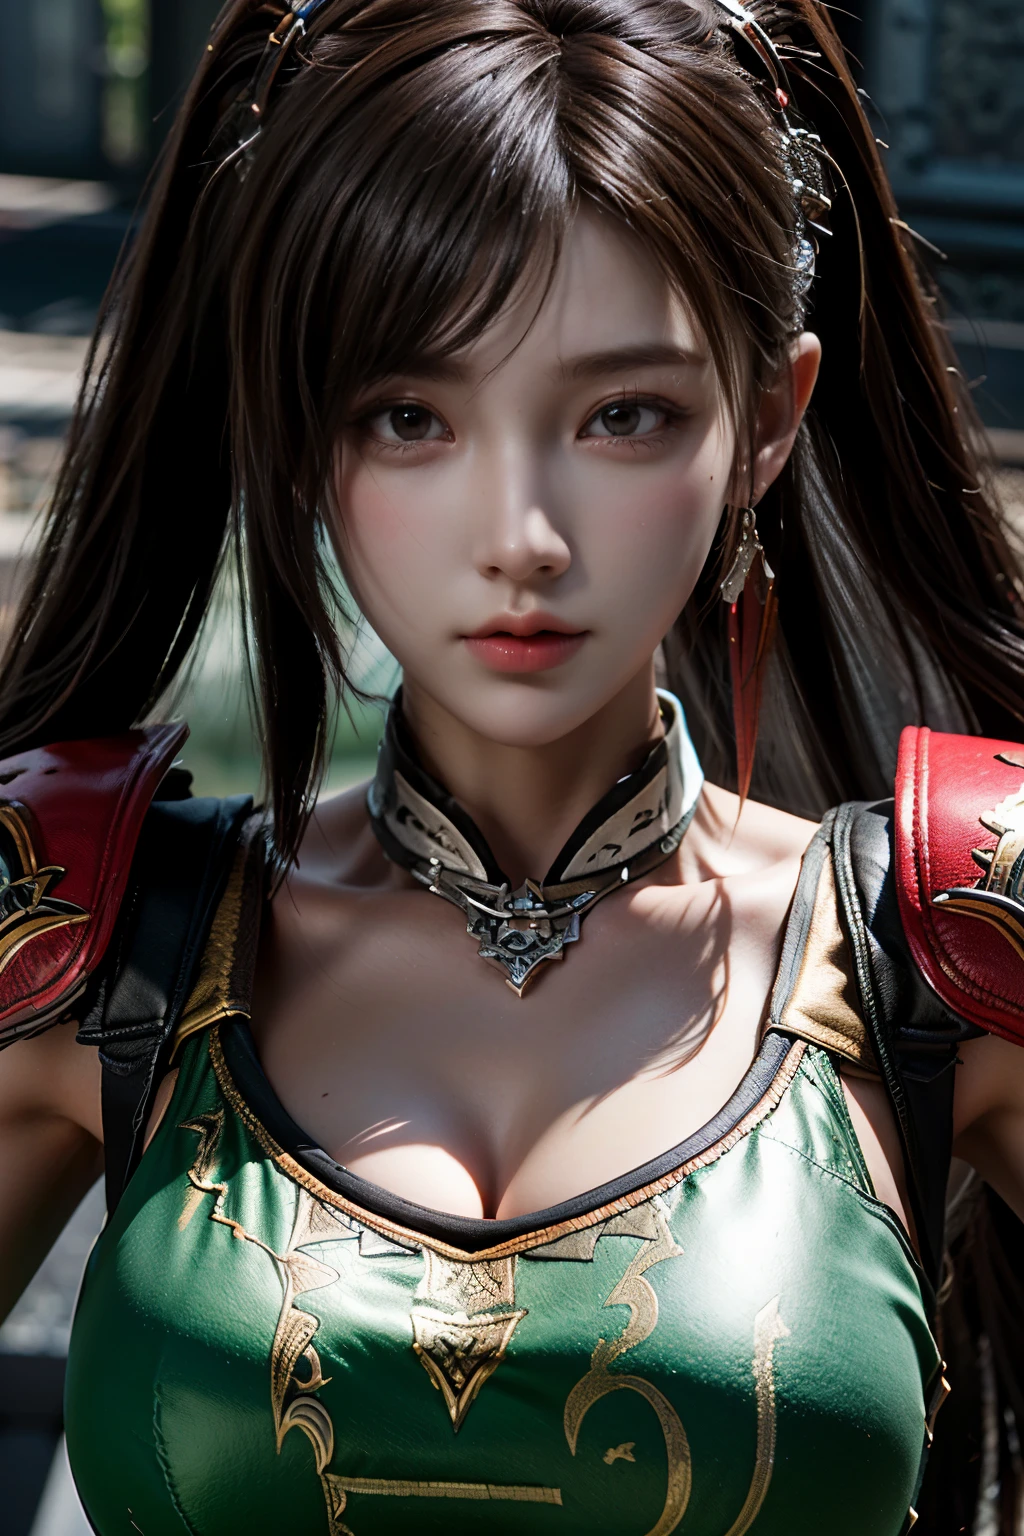 Game art，The best picture quality，Highest resolution，8K，(A bust photograph)，(Portrait)，(Head close-up)，(Rule of thirds)，Unreal Engine 5 rendering works， (The Girl of the Future)，(Female Warrior)， 
20-year-old girl，((Hunter))，An eye rich in detail，(Big breasts)，Elegant and noble，indifferent，brave，
（Medieval-style fur combat clothing，Glowing magic lines，Animal skin clothing with rich details,Red and white），Medieval Lady Knight，Medieval ranger，
photo poses，simple background，Movie lights，Ray tracing，Game CG，((3D Unreal Engine))，OC rendering reflection pattern